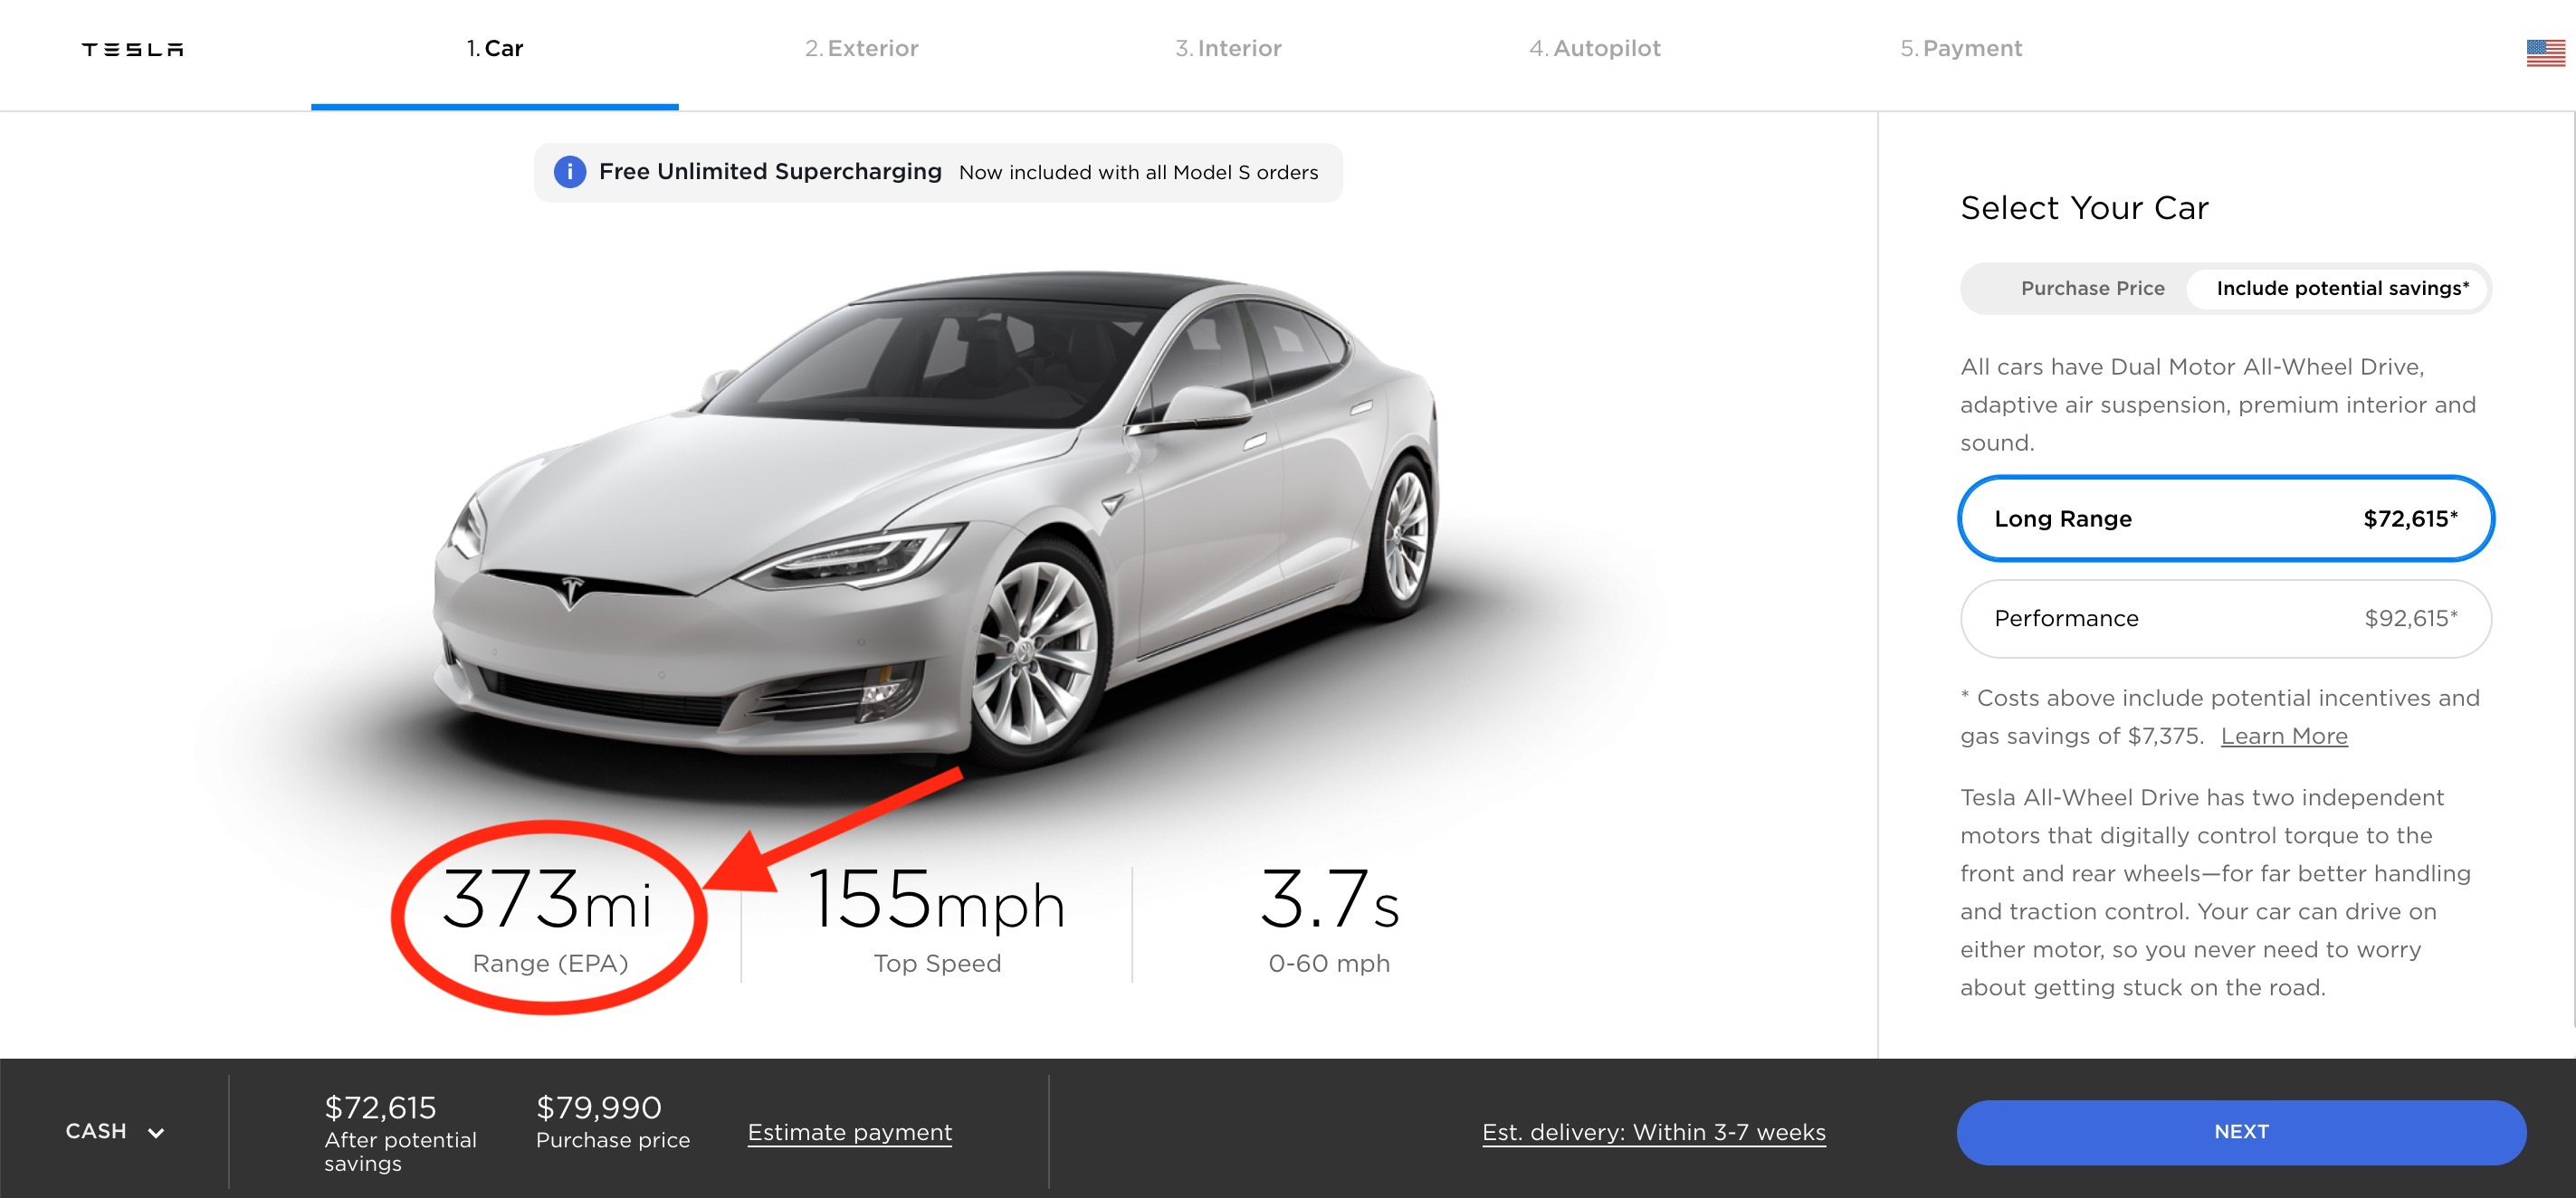 clothing Absolutely Throb Tesla increases Model S and Model X range, now tops at 373 miles | Electrek